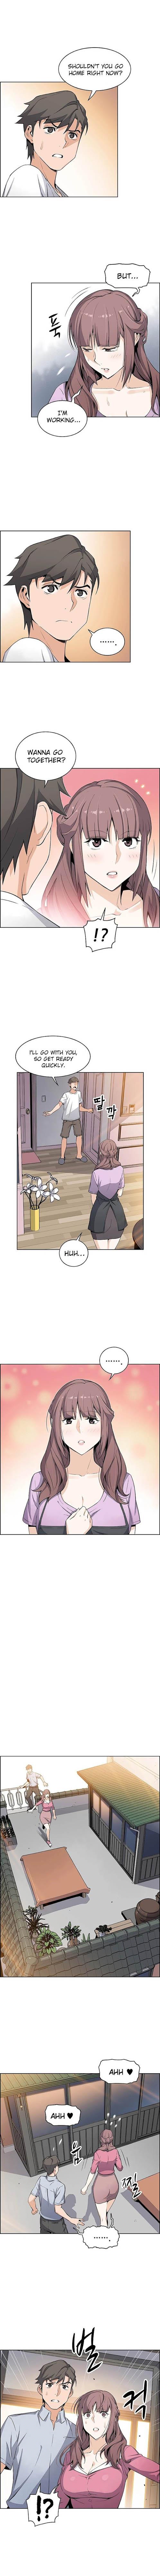 Housekeeper [Neck Pillow, Paper] Ch.49/49 [English] [Manhwa PDF] Completed 215